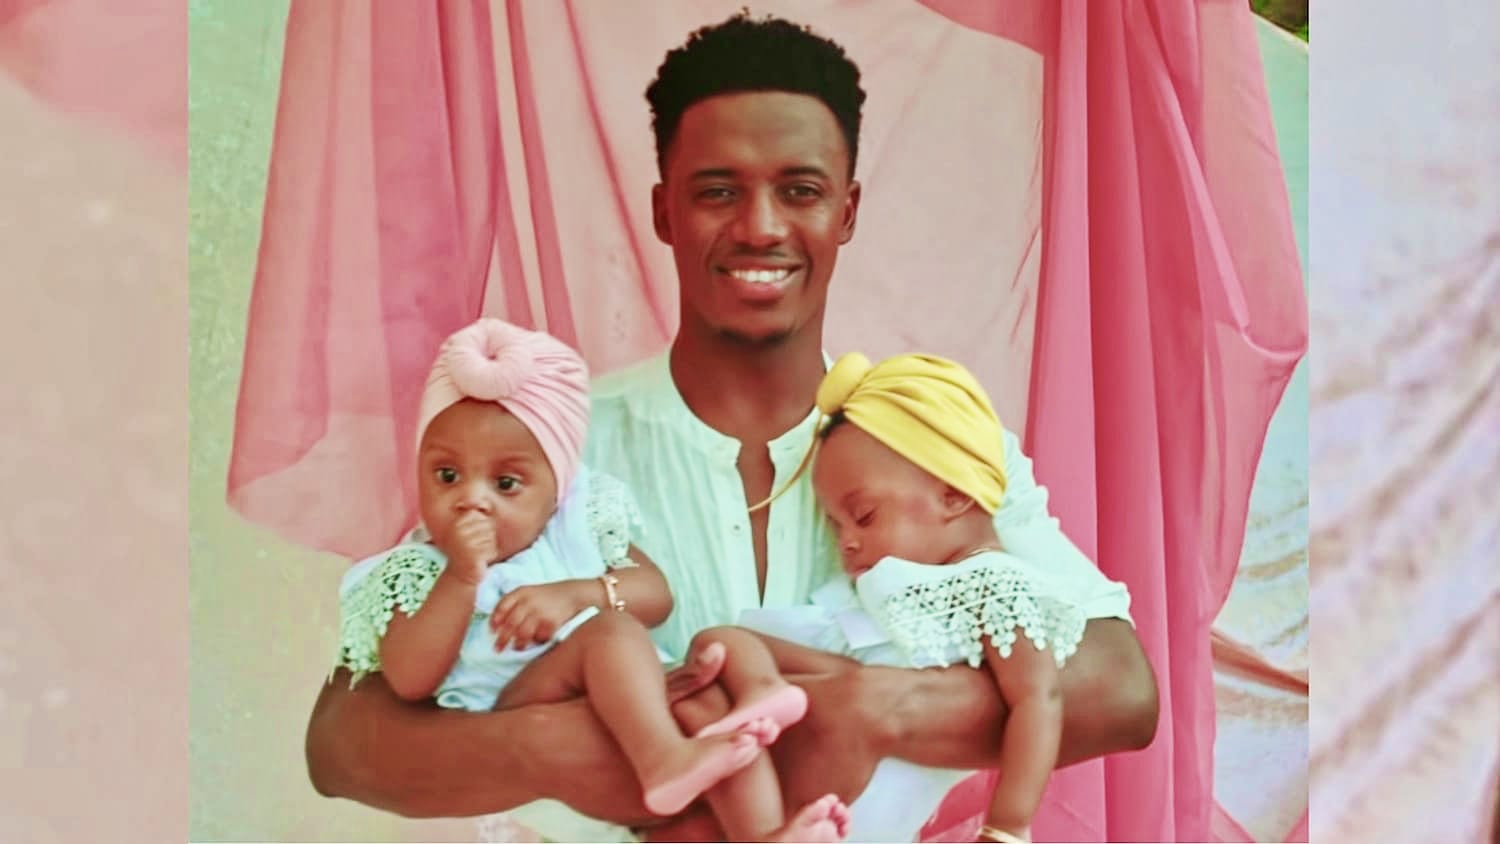 Romain Virgo Shows Off His Babies In New Music Video